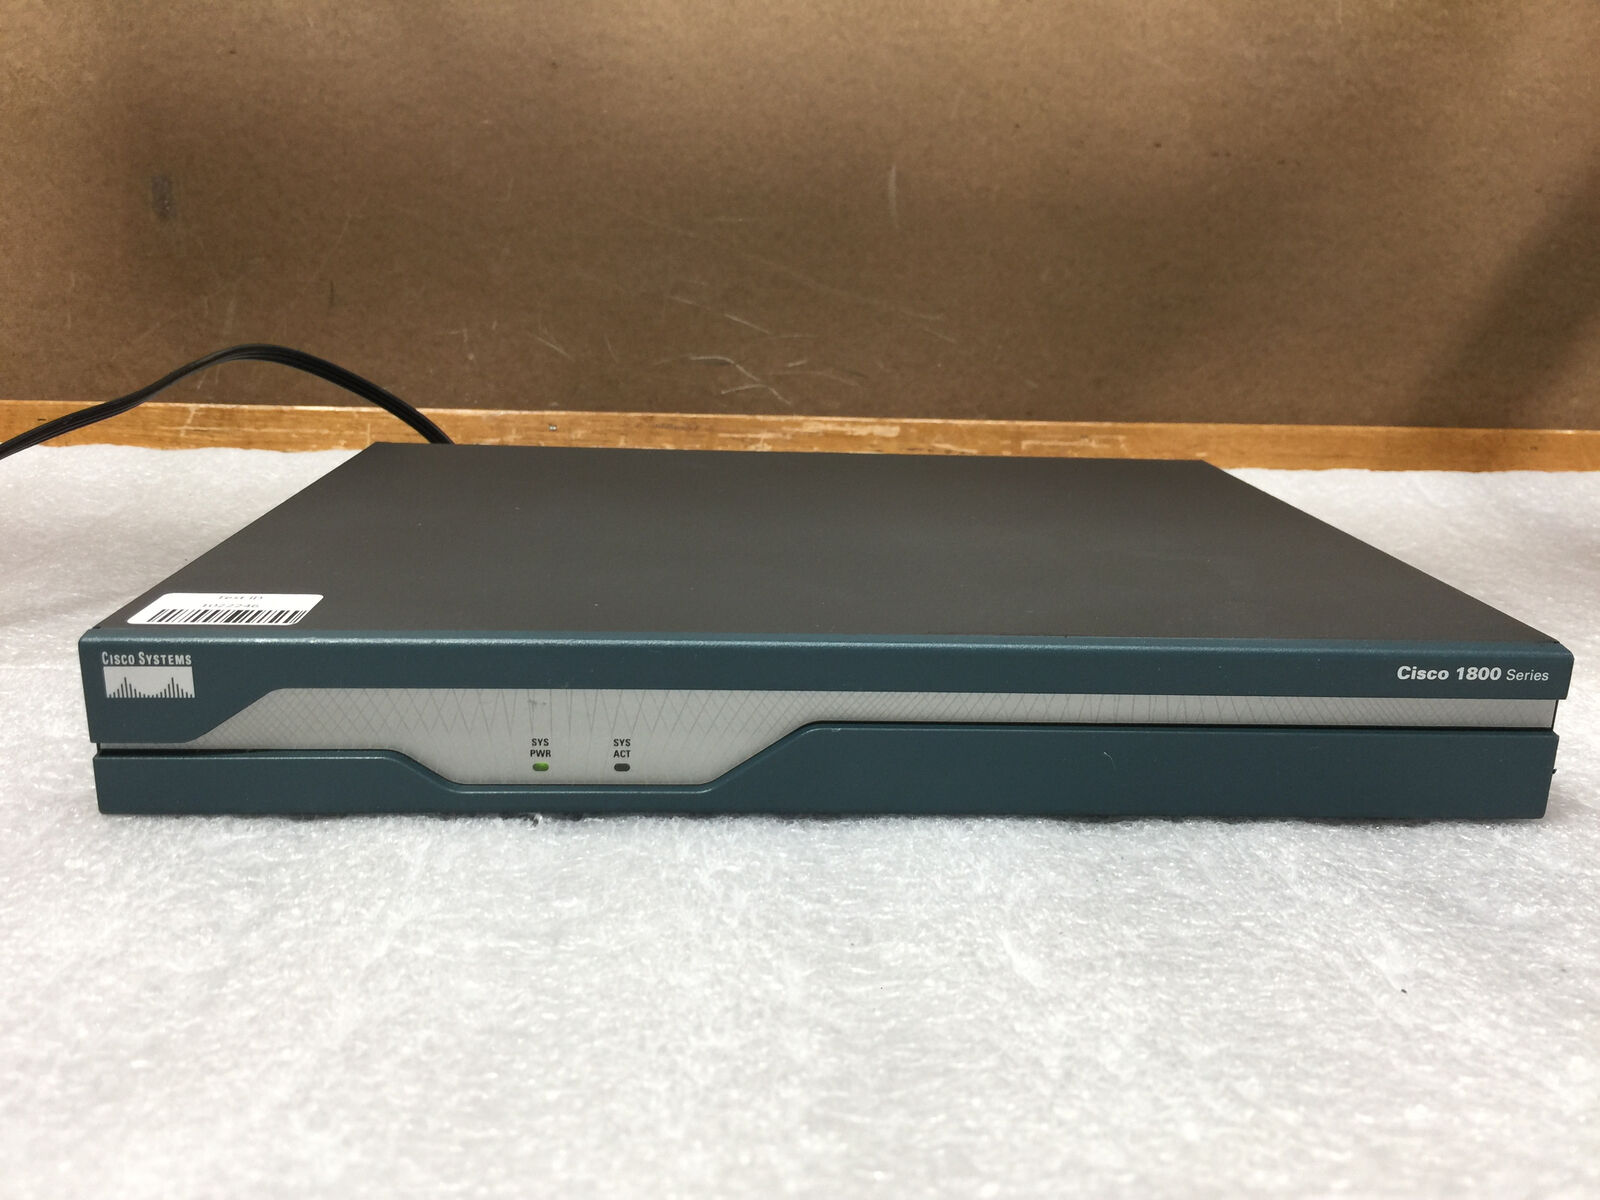 Cisco 1800 Series Cisco1841 V05 Integrated Services Router, TESTED/FACTORY RESET